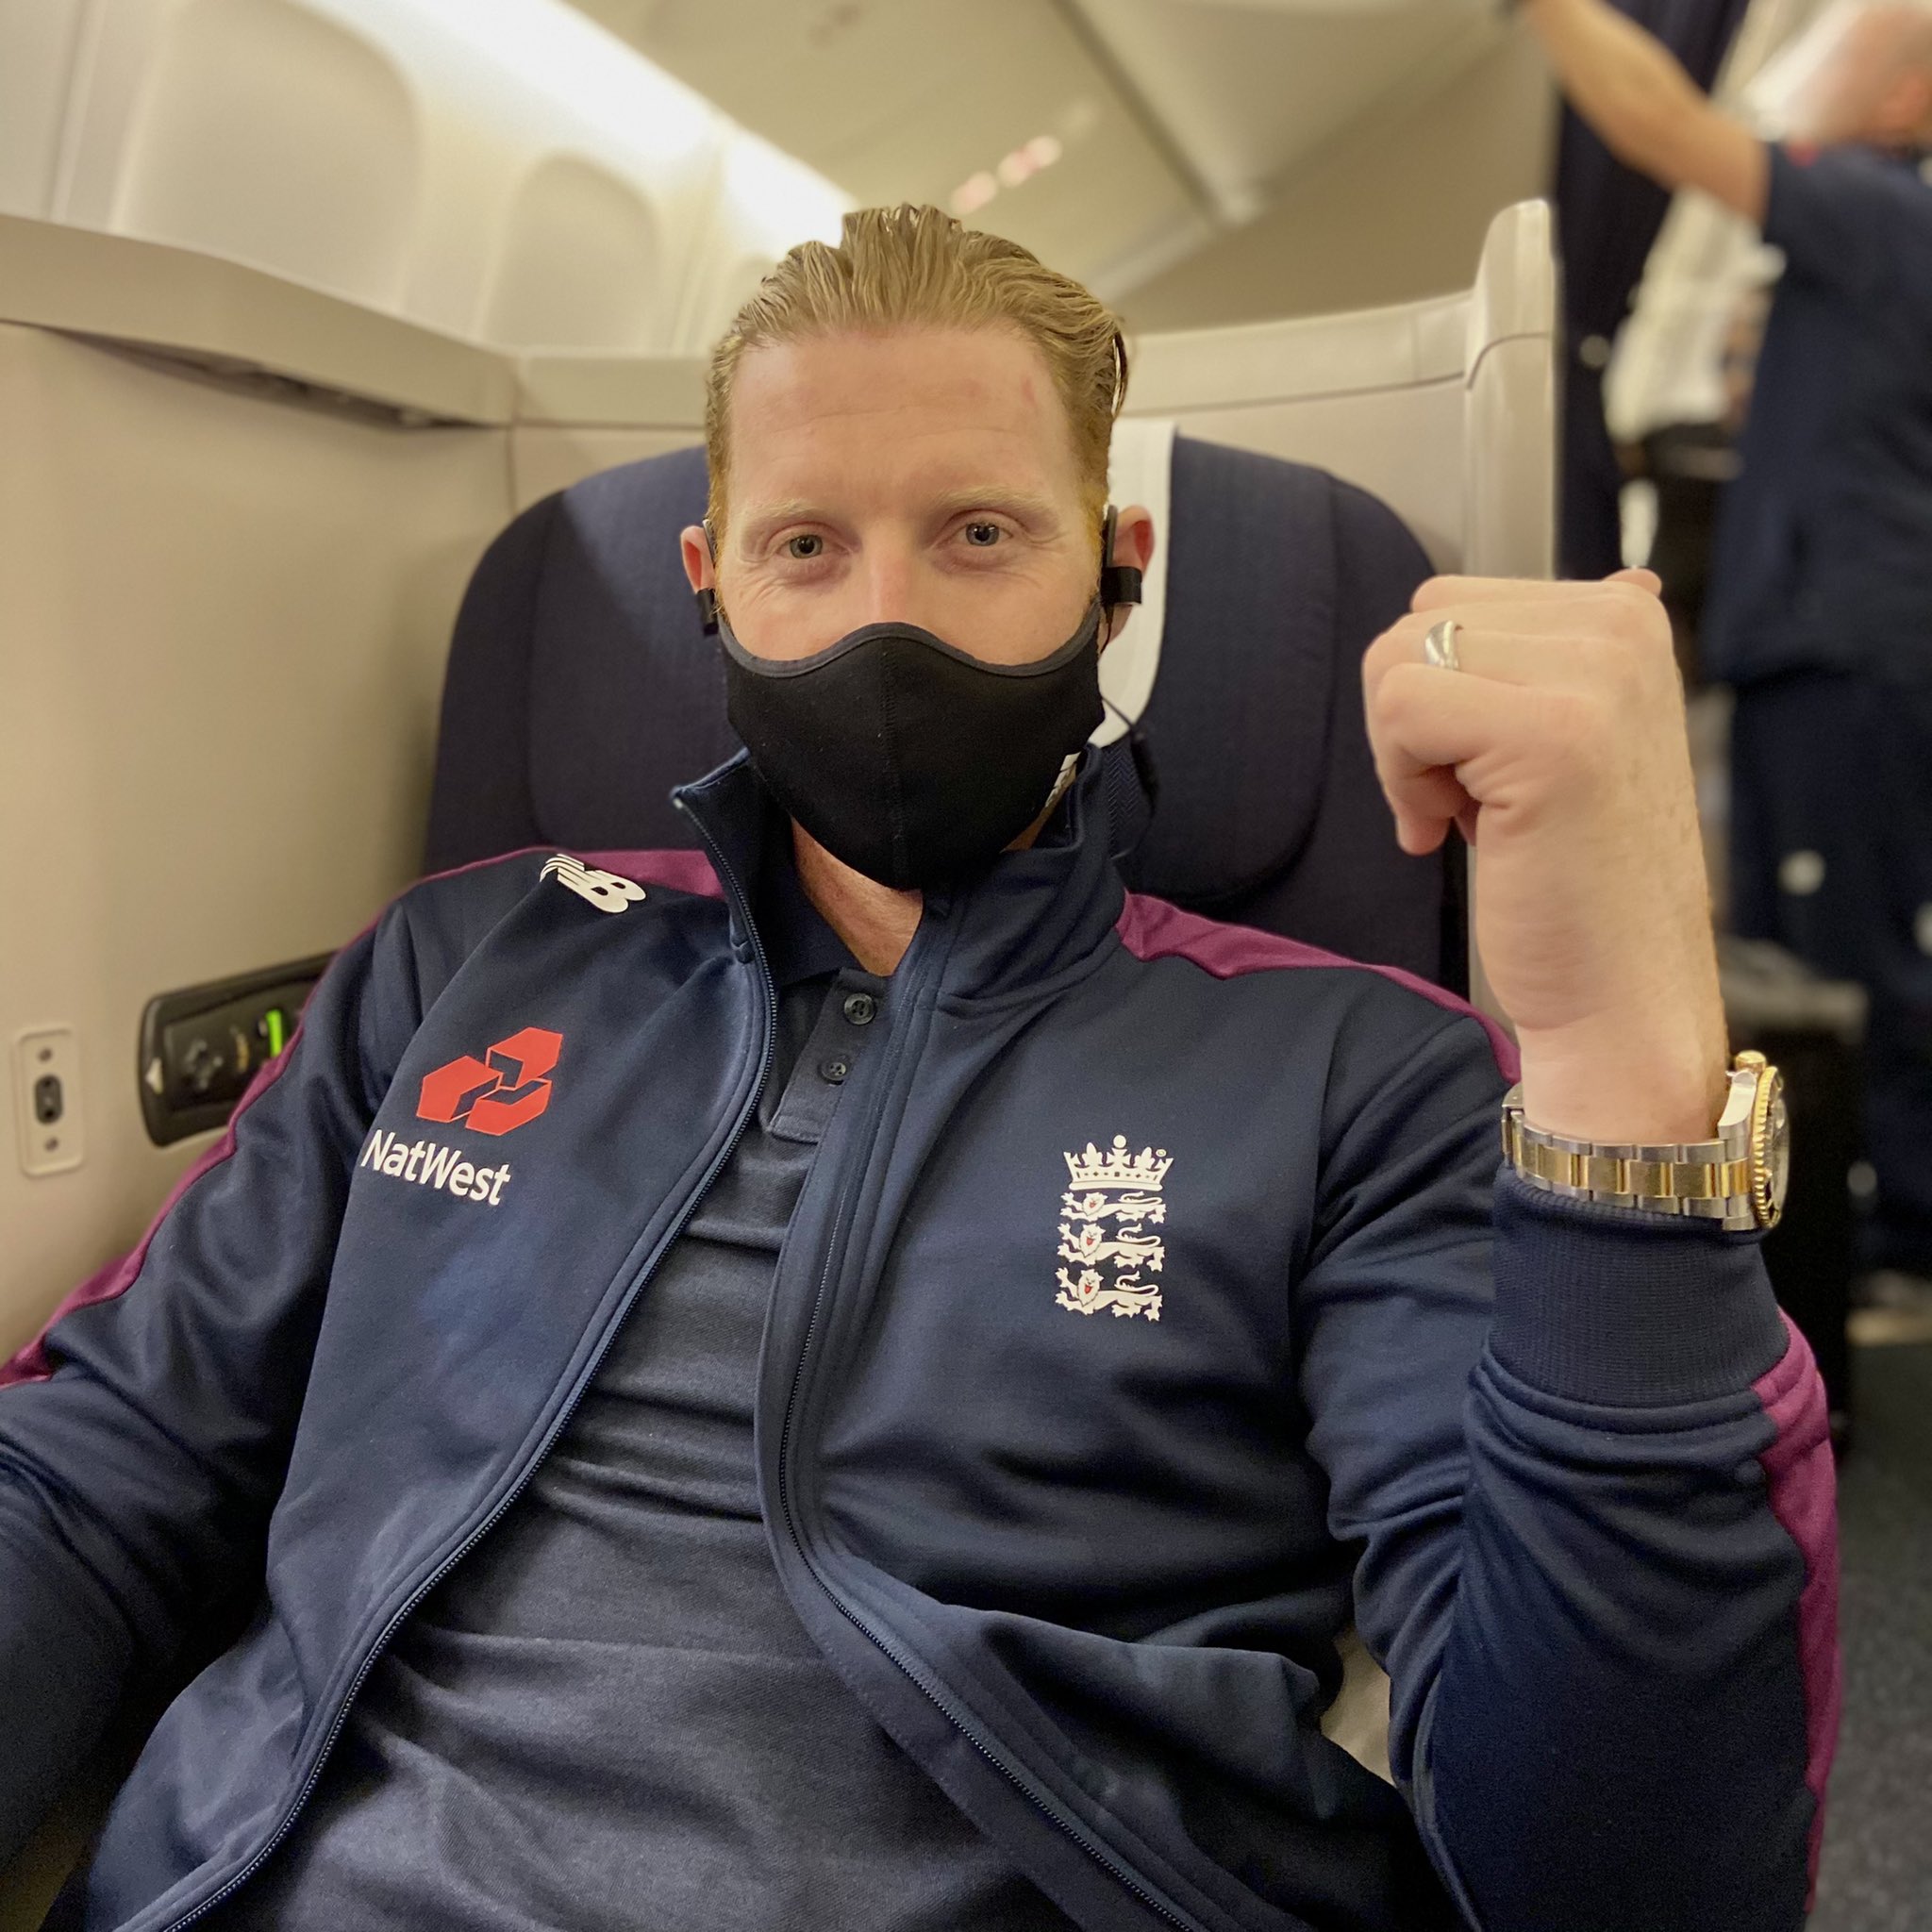 Indian Fans Share Hilarious Memes On Ben Stokes Twitter Timeline After He Shared An Image From His Flight To India